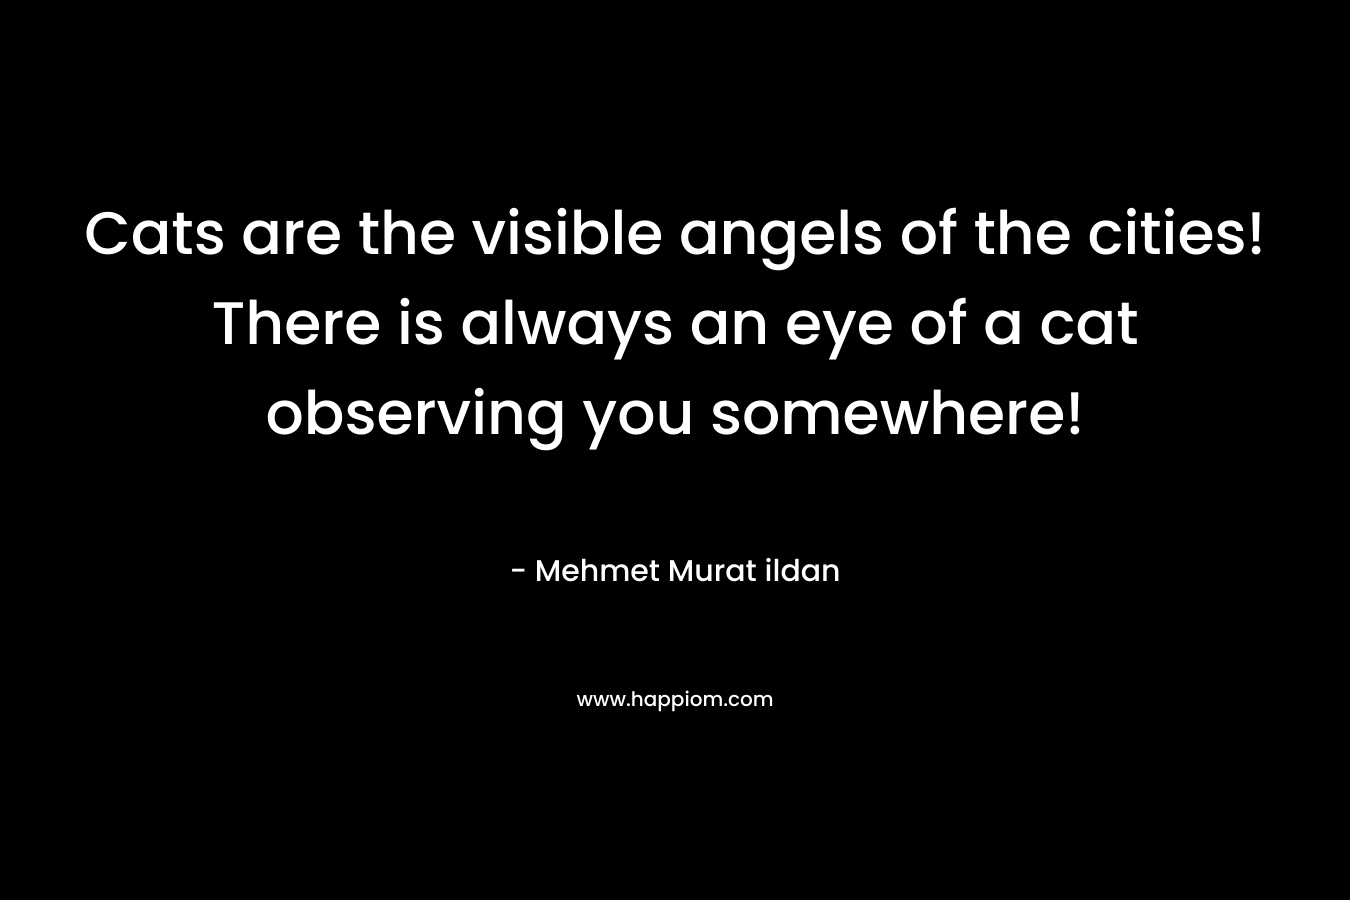 Cats are the visible angels of the cities! There is always an eye of a cat observing you somewhere! – Mehmet Murat ildan